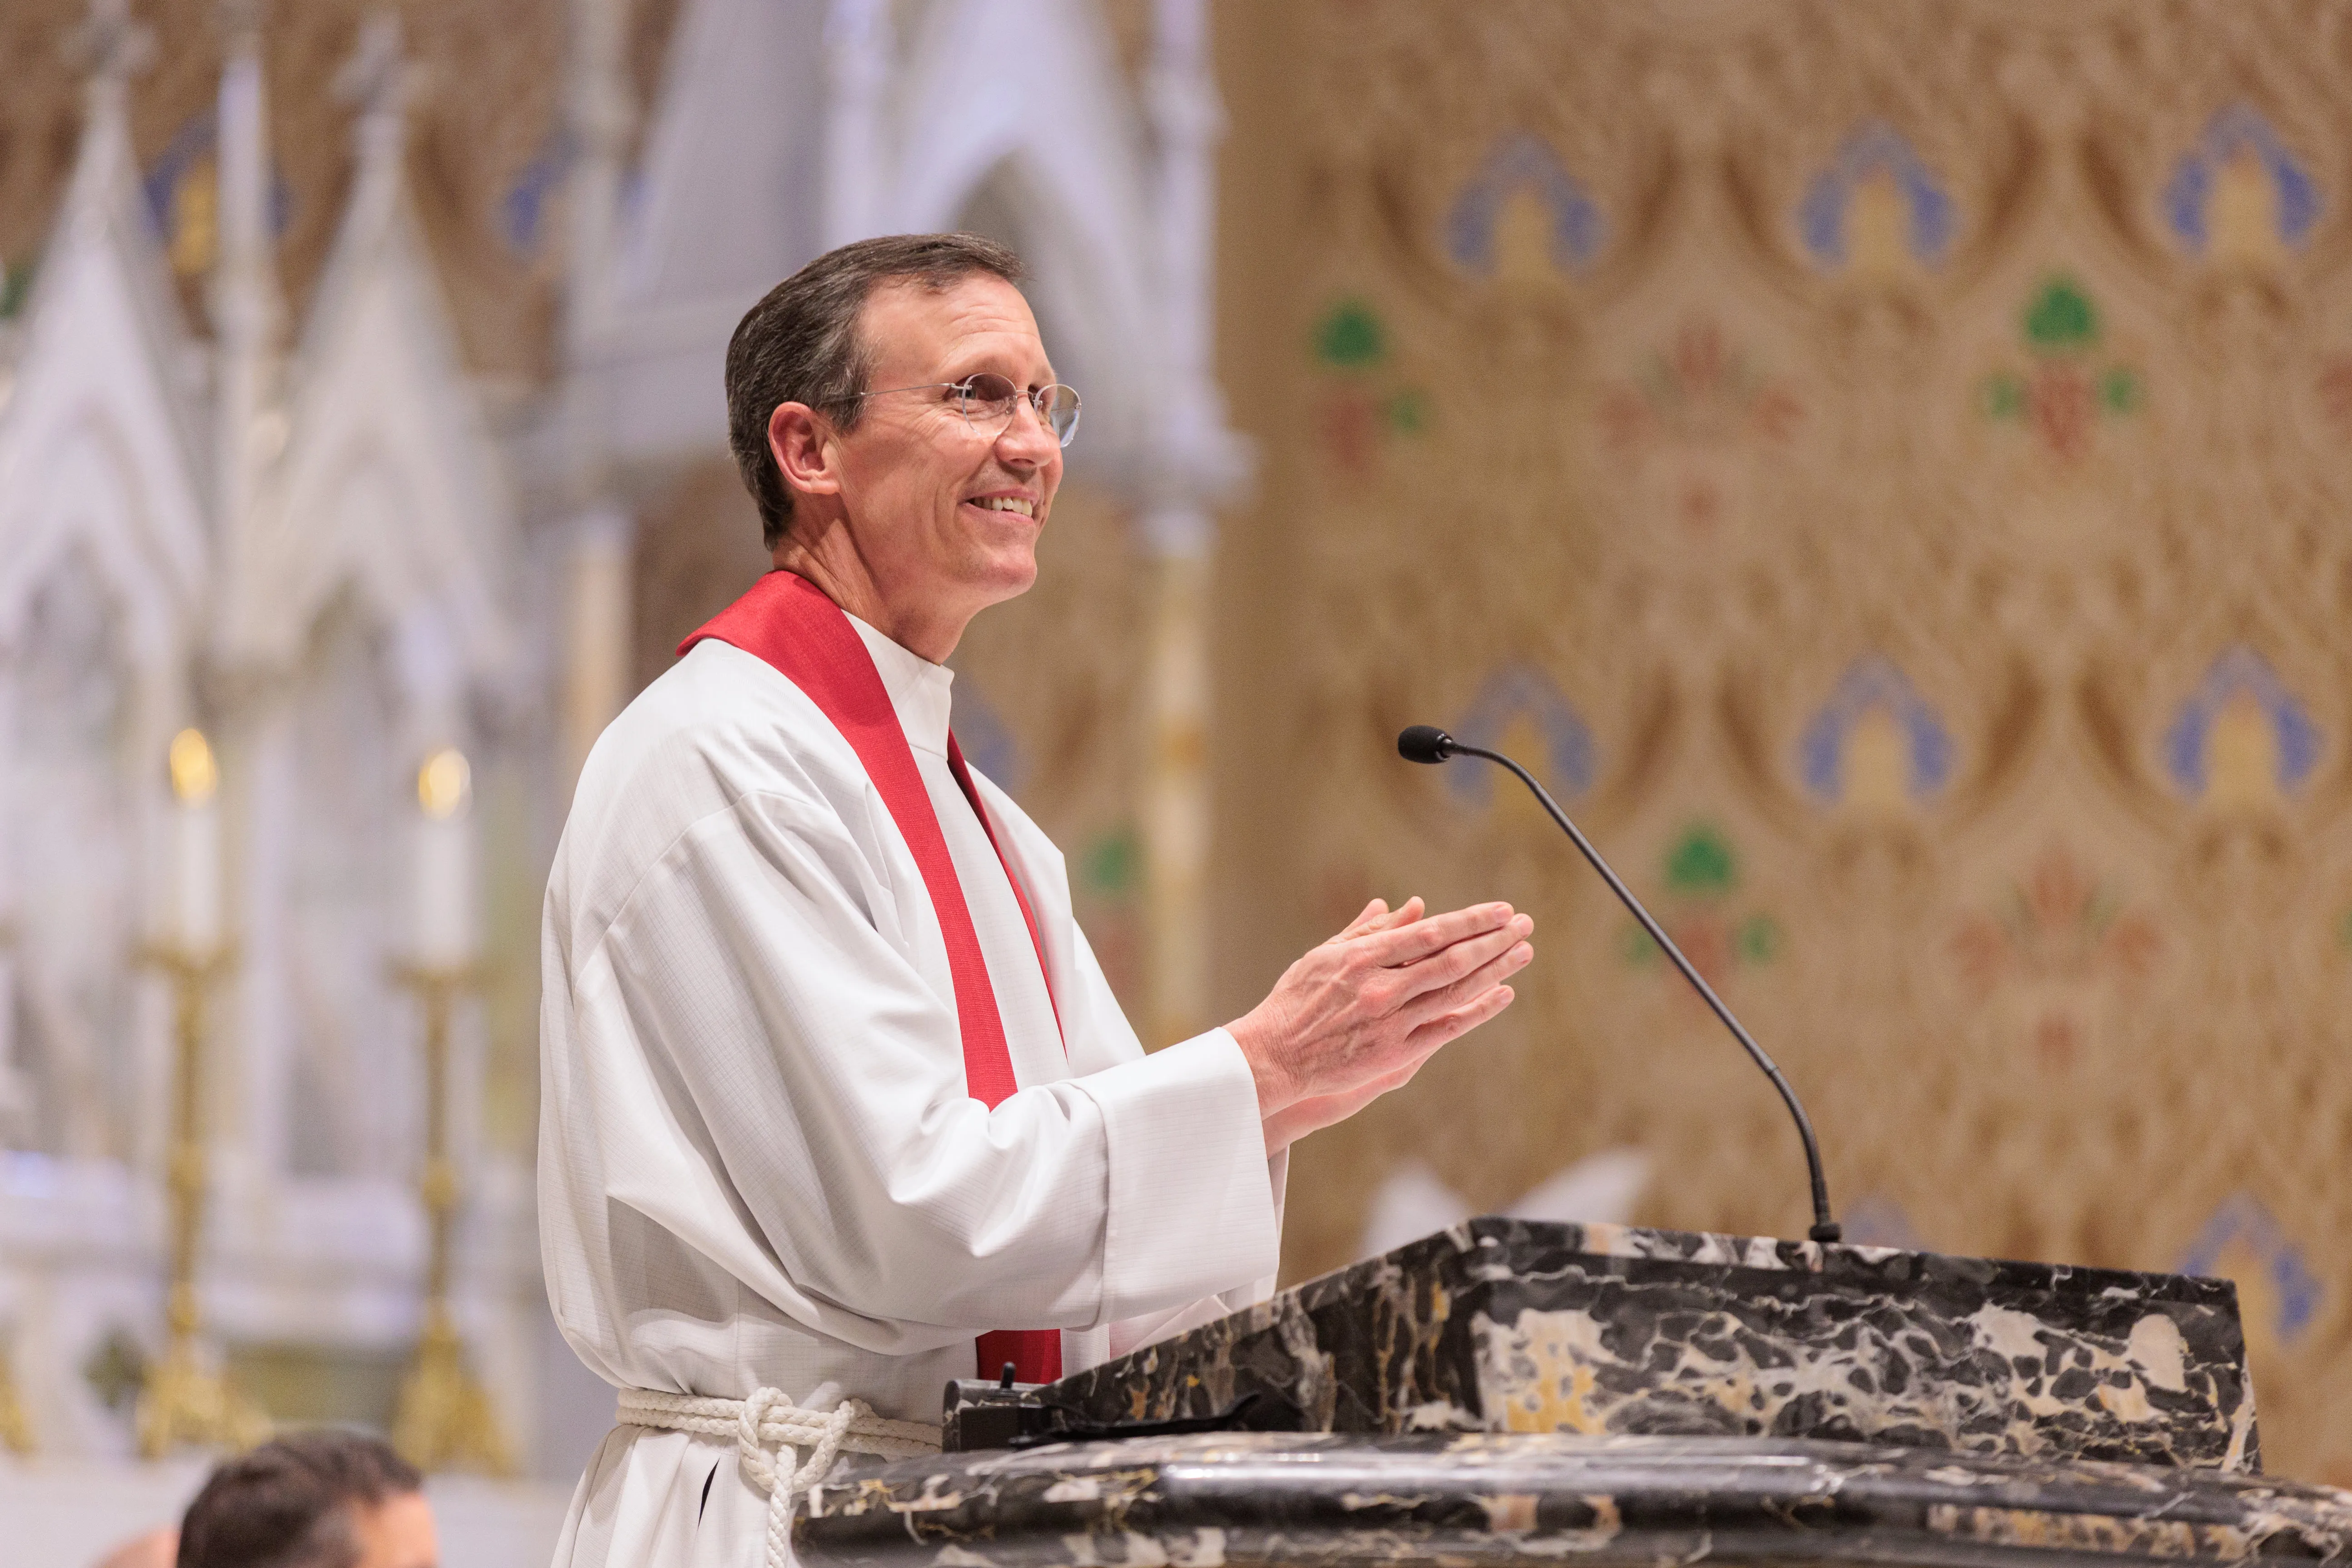 The rector of the new basilica, Father Kevin Segerblom, at the lectern. Credit: Ryan Hunt/Catholic Diocese of Richmond